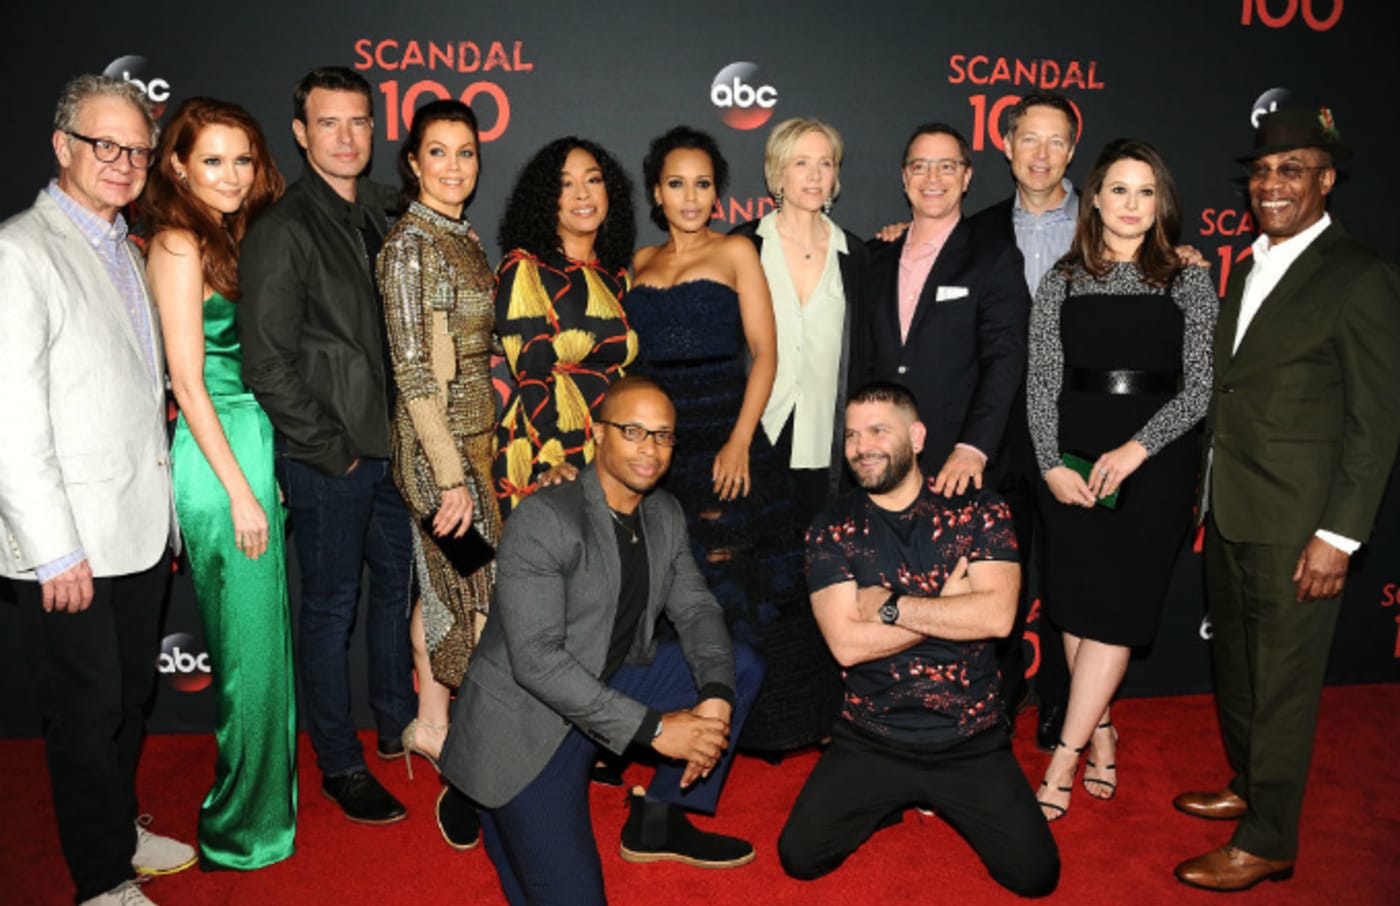 ‘Scandal’ Cast to Perform Live Reading of Series Finale the Night It